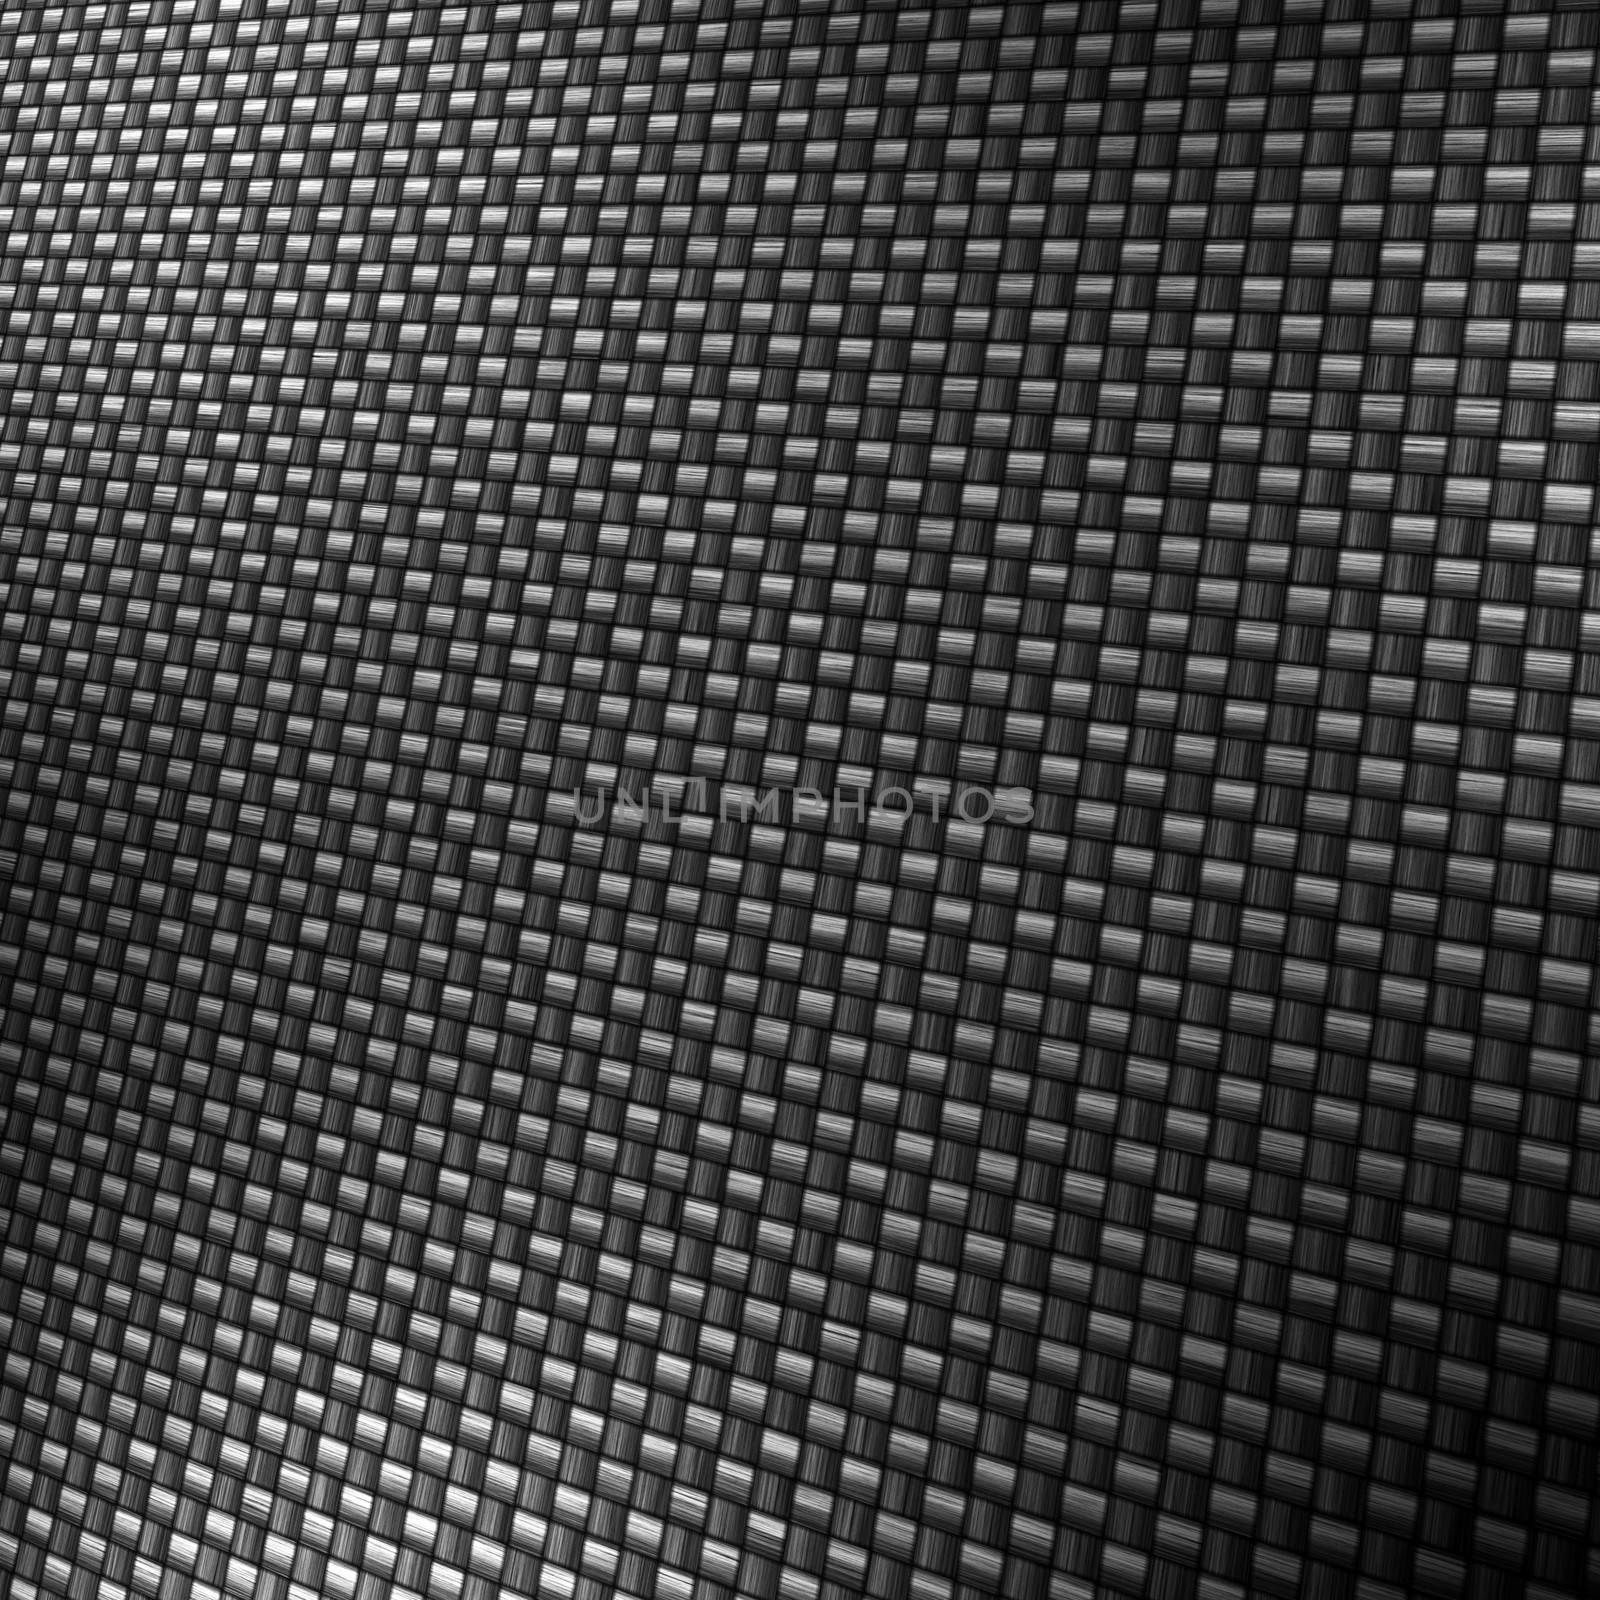 A super-detailed carbon fiber background. The actual strands and fibers of the carbon cloth are even visible.